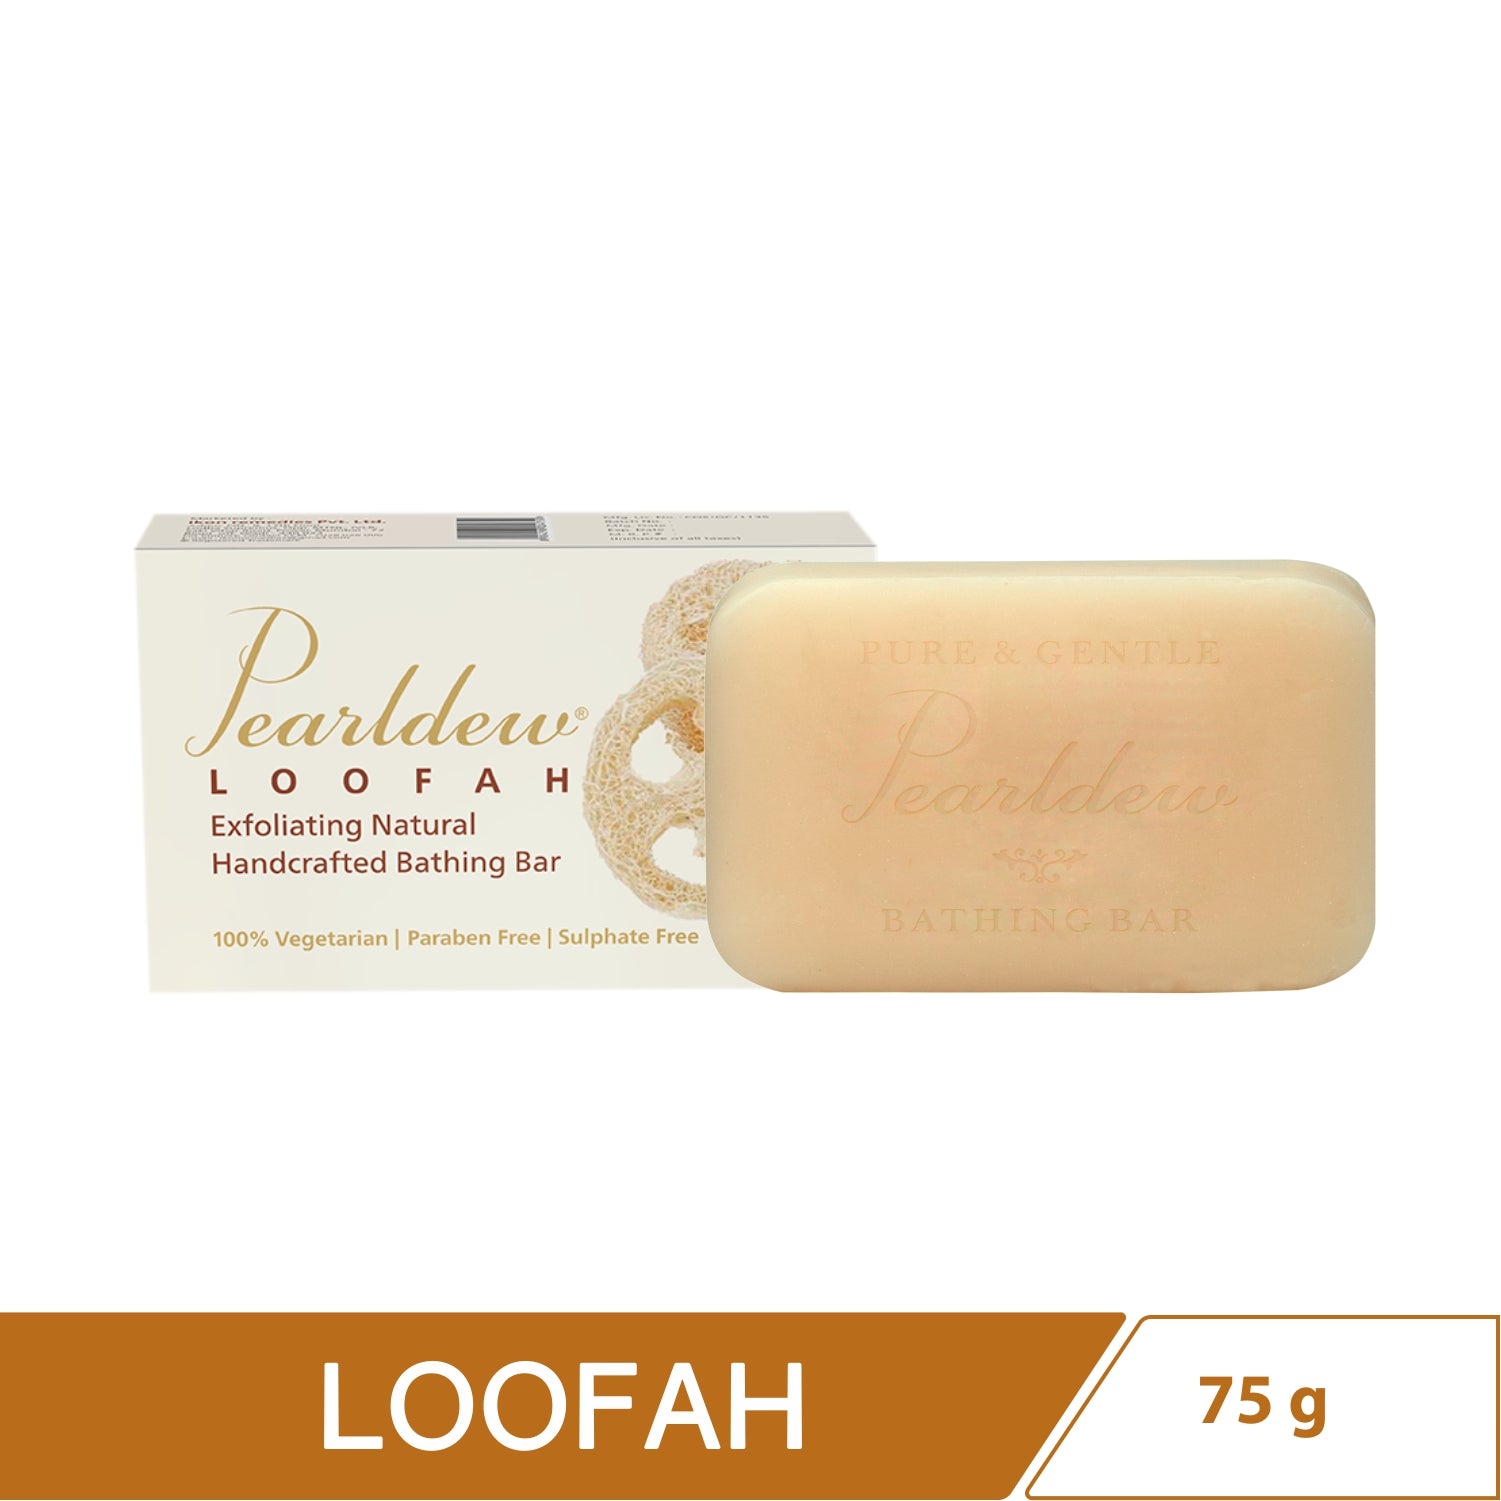 Pearldew Loofah Exfoliating Natural Handcrafted Bathing Bar (75 gm)